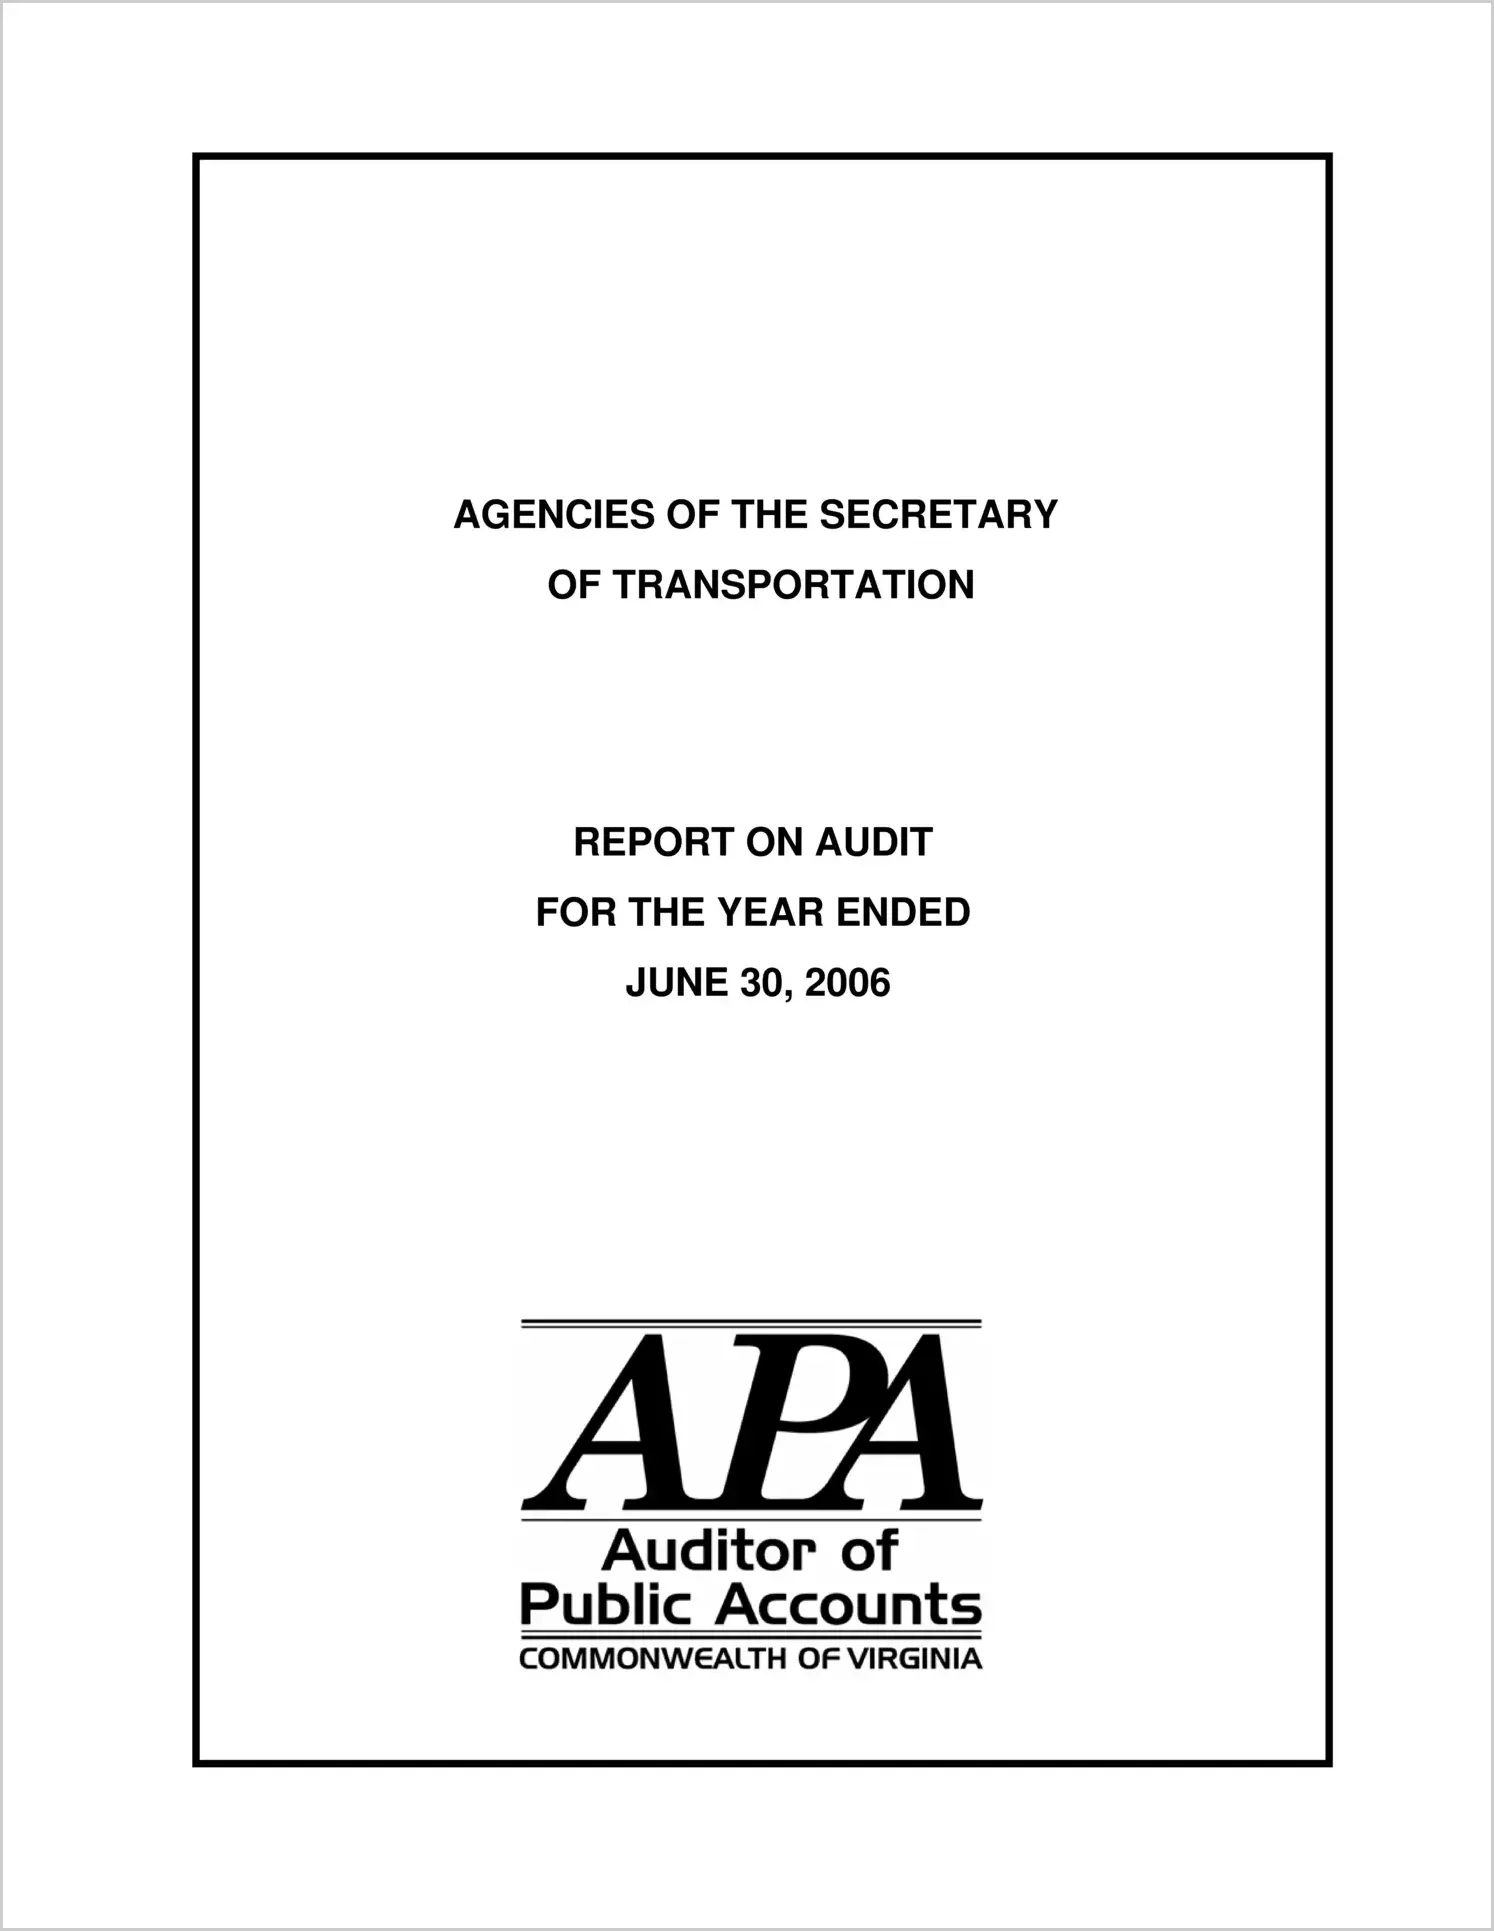 Agencies of the Secretary of Transportation for the year ended June 30, 2006